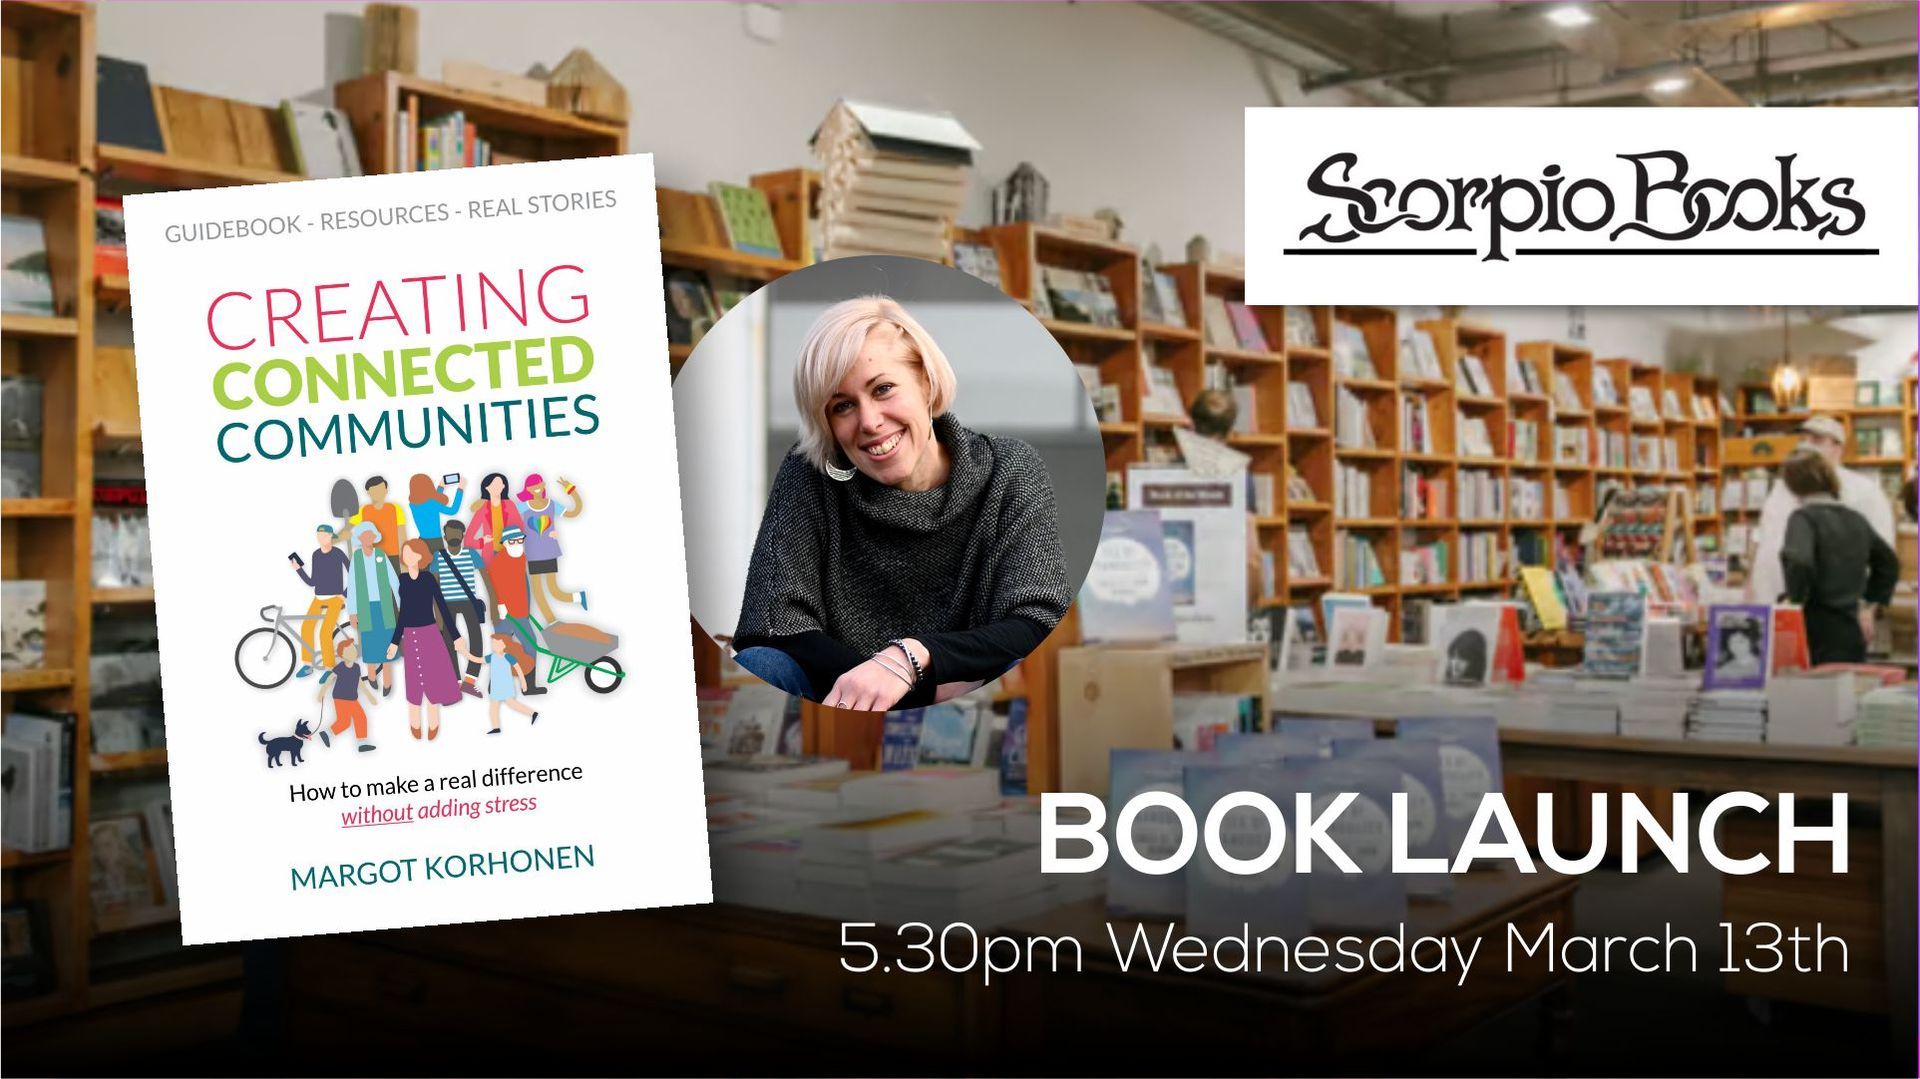 Come and join me to celebrate the launch of my new book Creating Connected Communities! 5.30pm on March 13 at Scorpio Books in Christchurch City.  